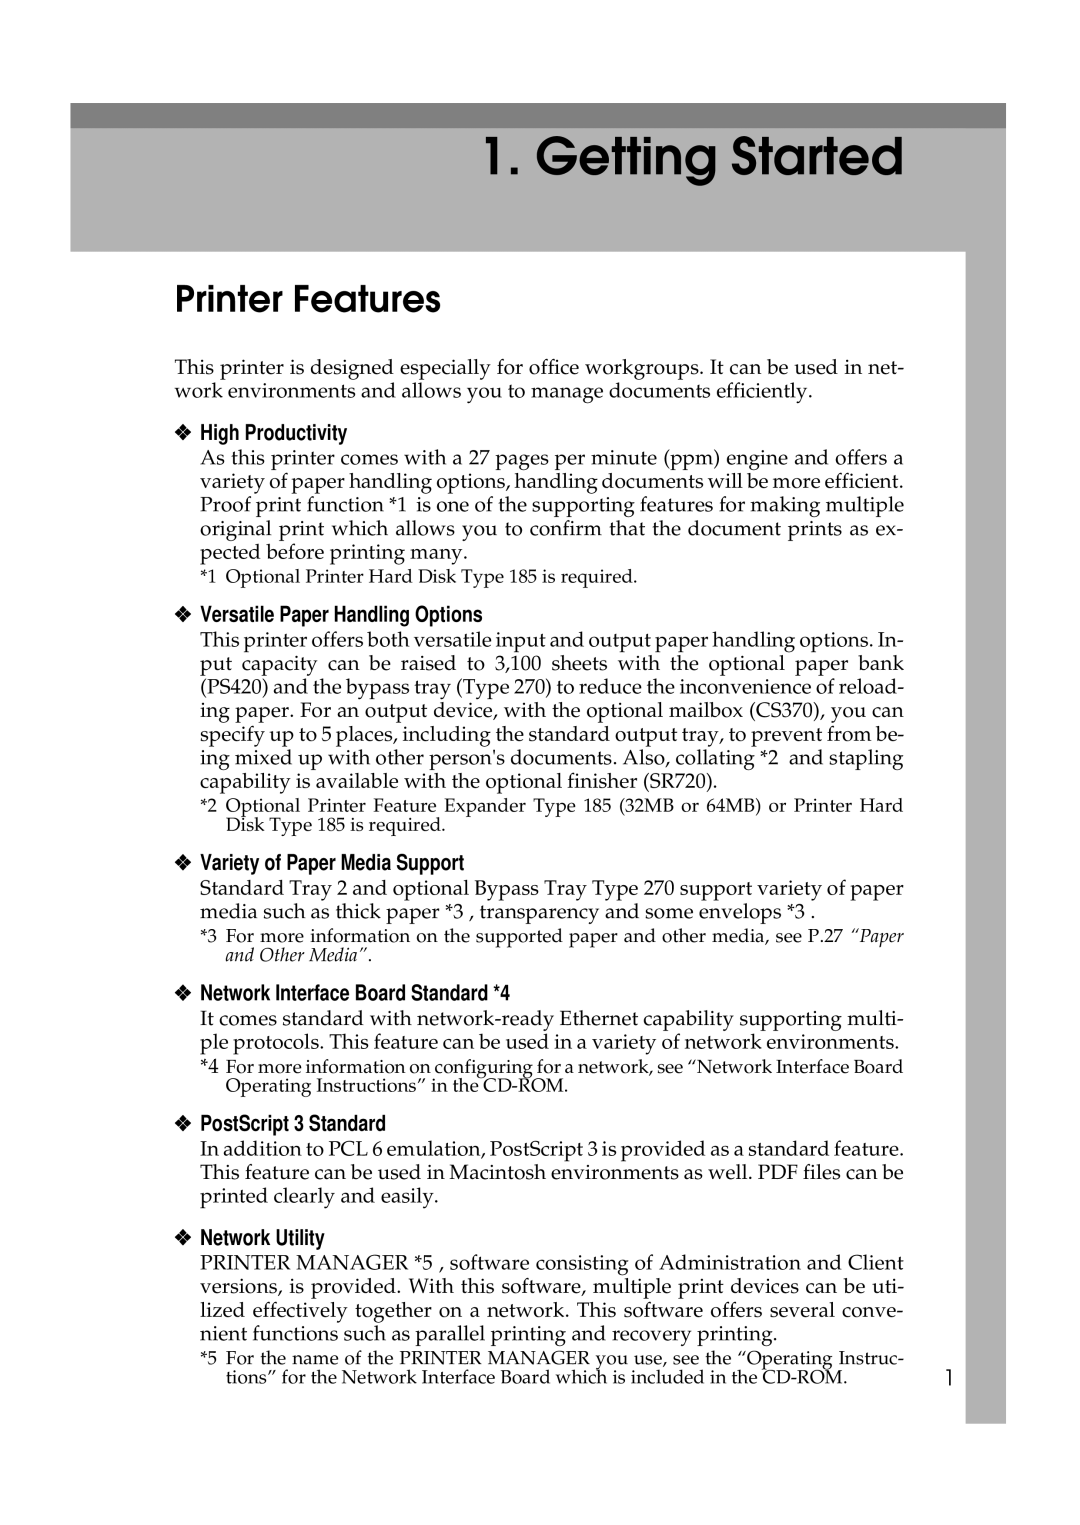 Ricoh Aficio AP2700 operating instructions Getting Started, Printer Features 